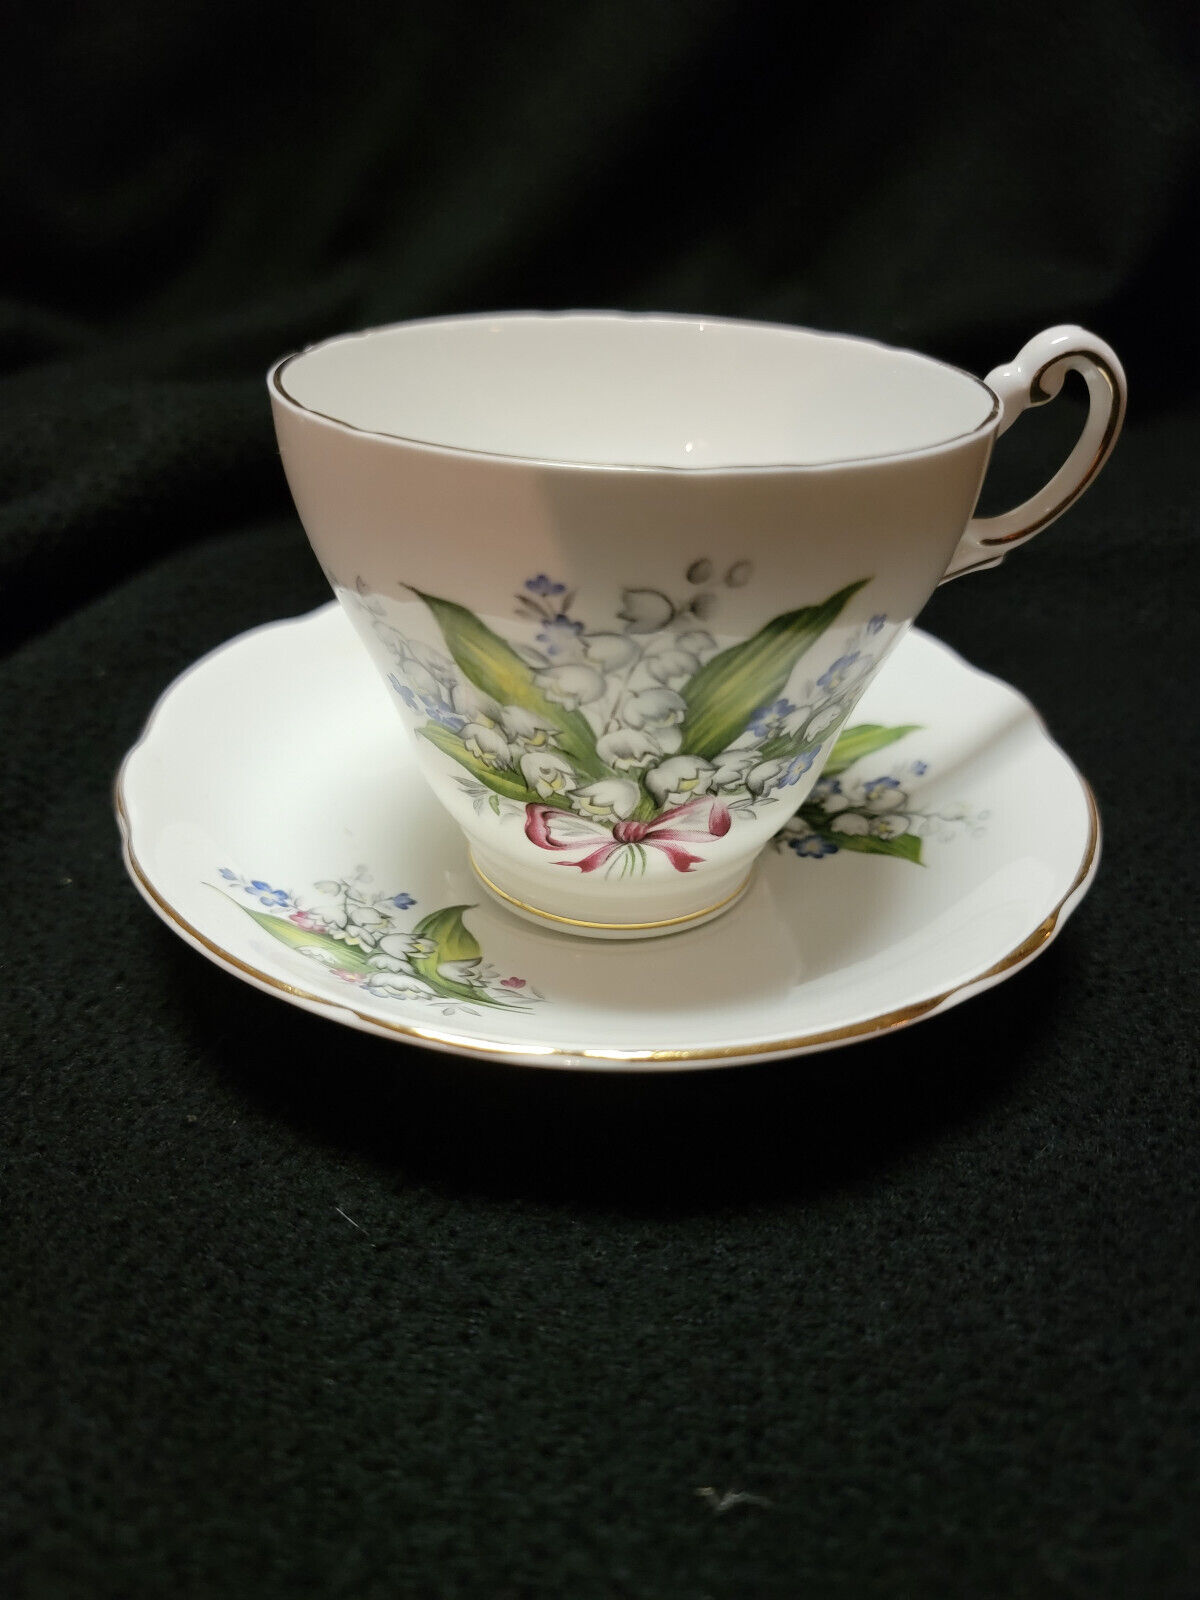 Vintage Regency English Bone China Tea Cup/Saucer Lilies of the Valley